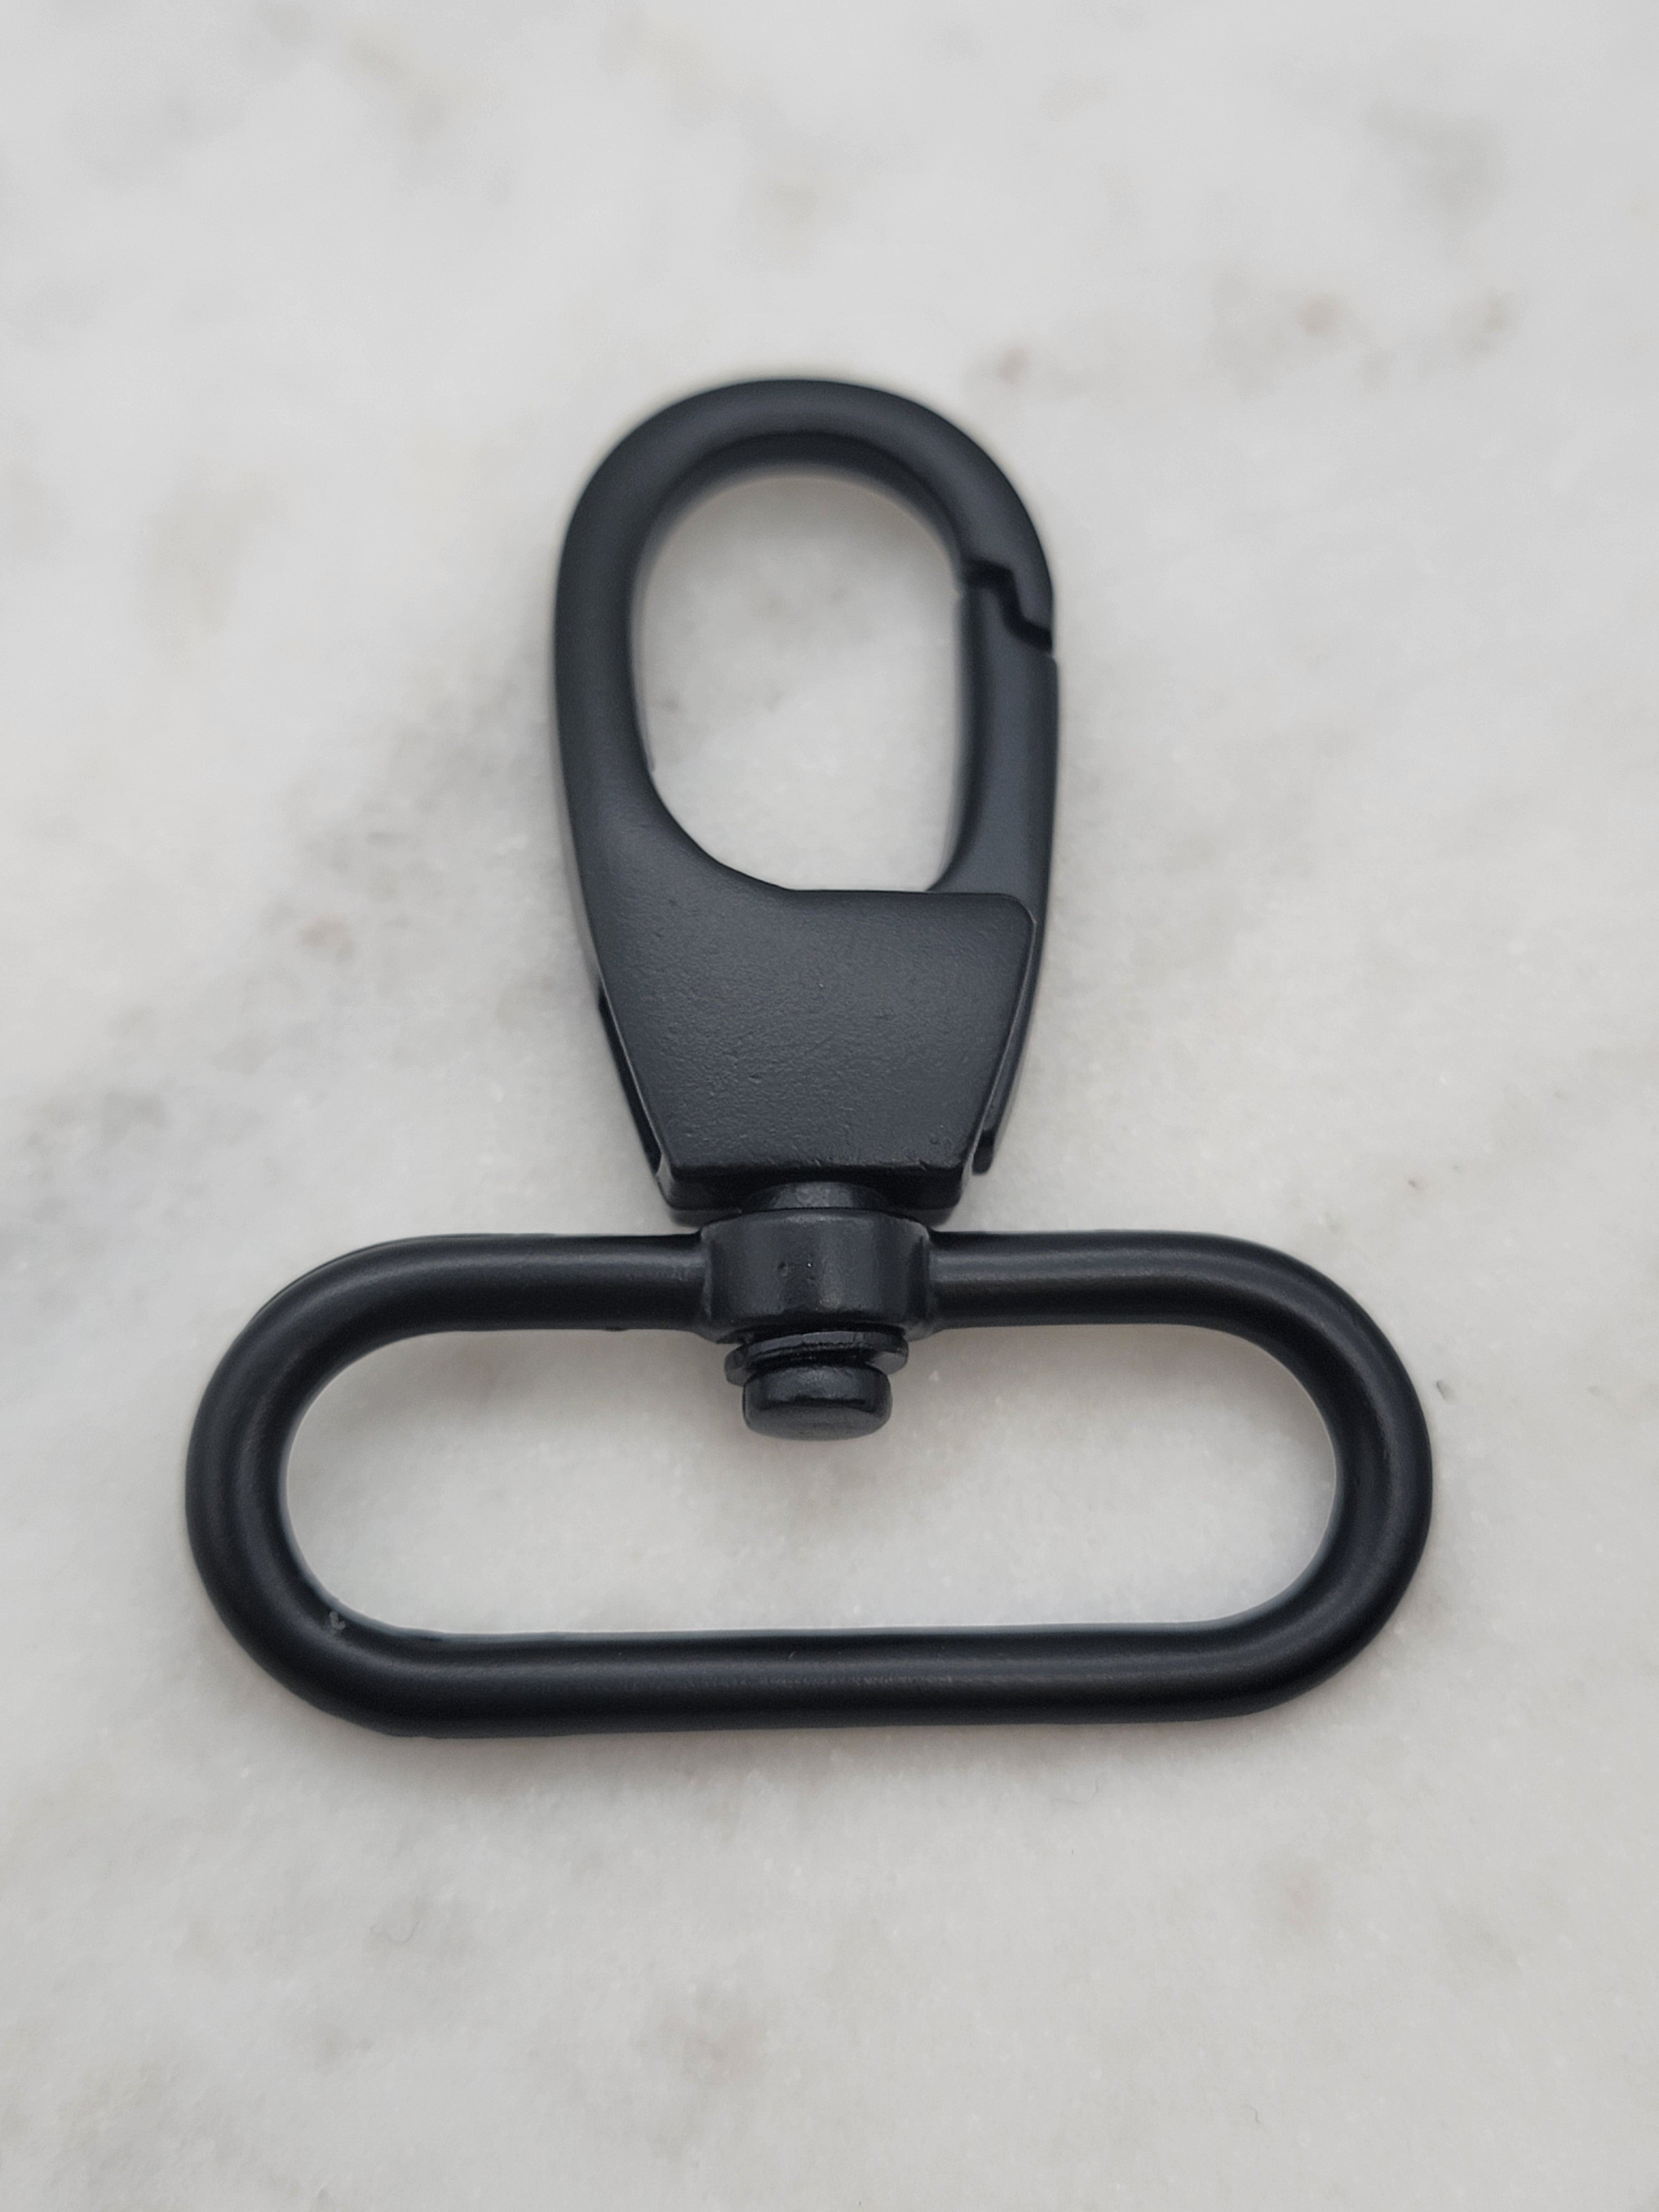 BS 1000kgs/2200lbs 1.5 inch Forged Swivel Snap Hook, 1.5 Forged